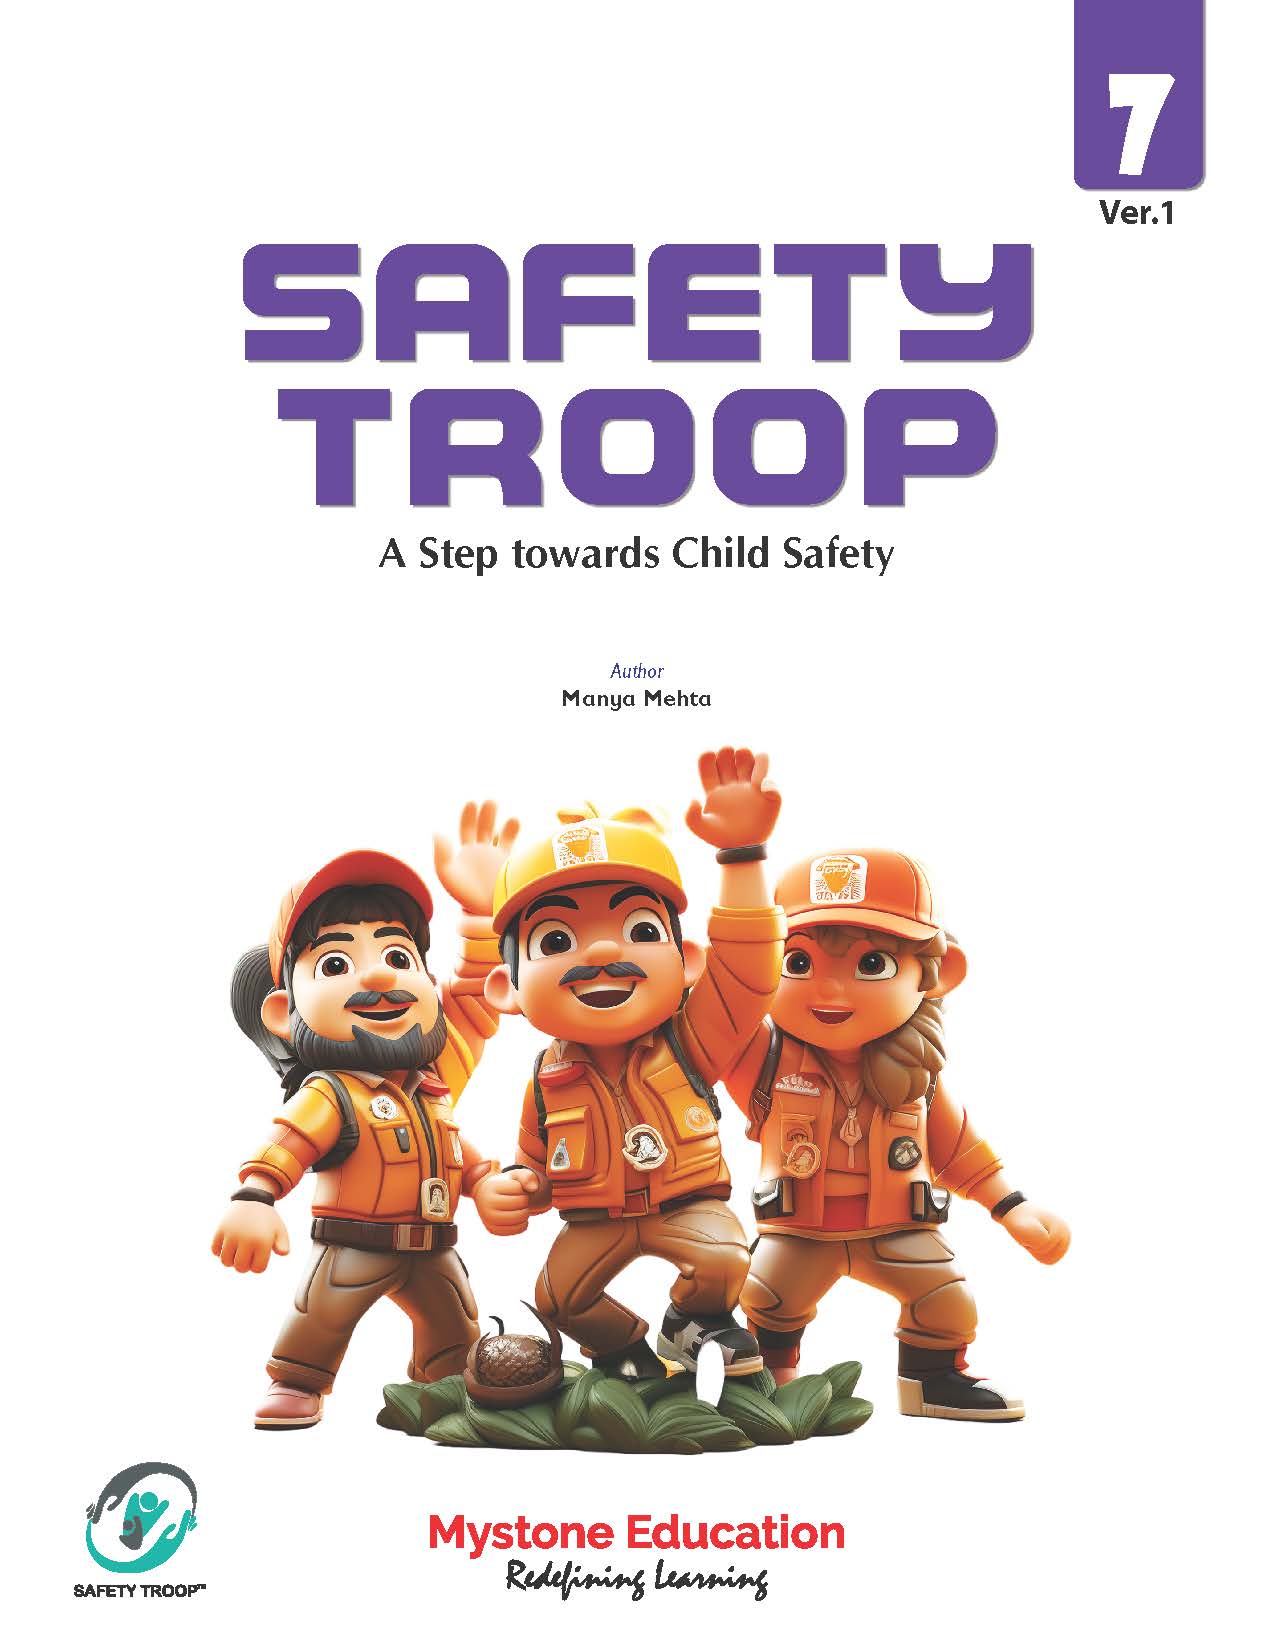 Safety Troop (A Step Towards Child Safety) Class 7 Ver 1